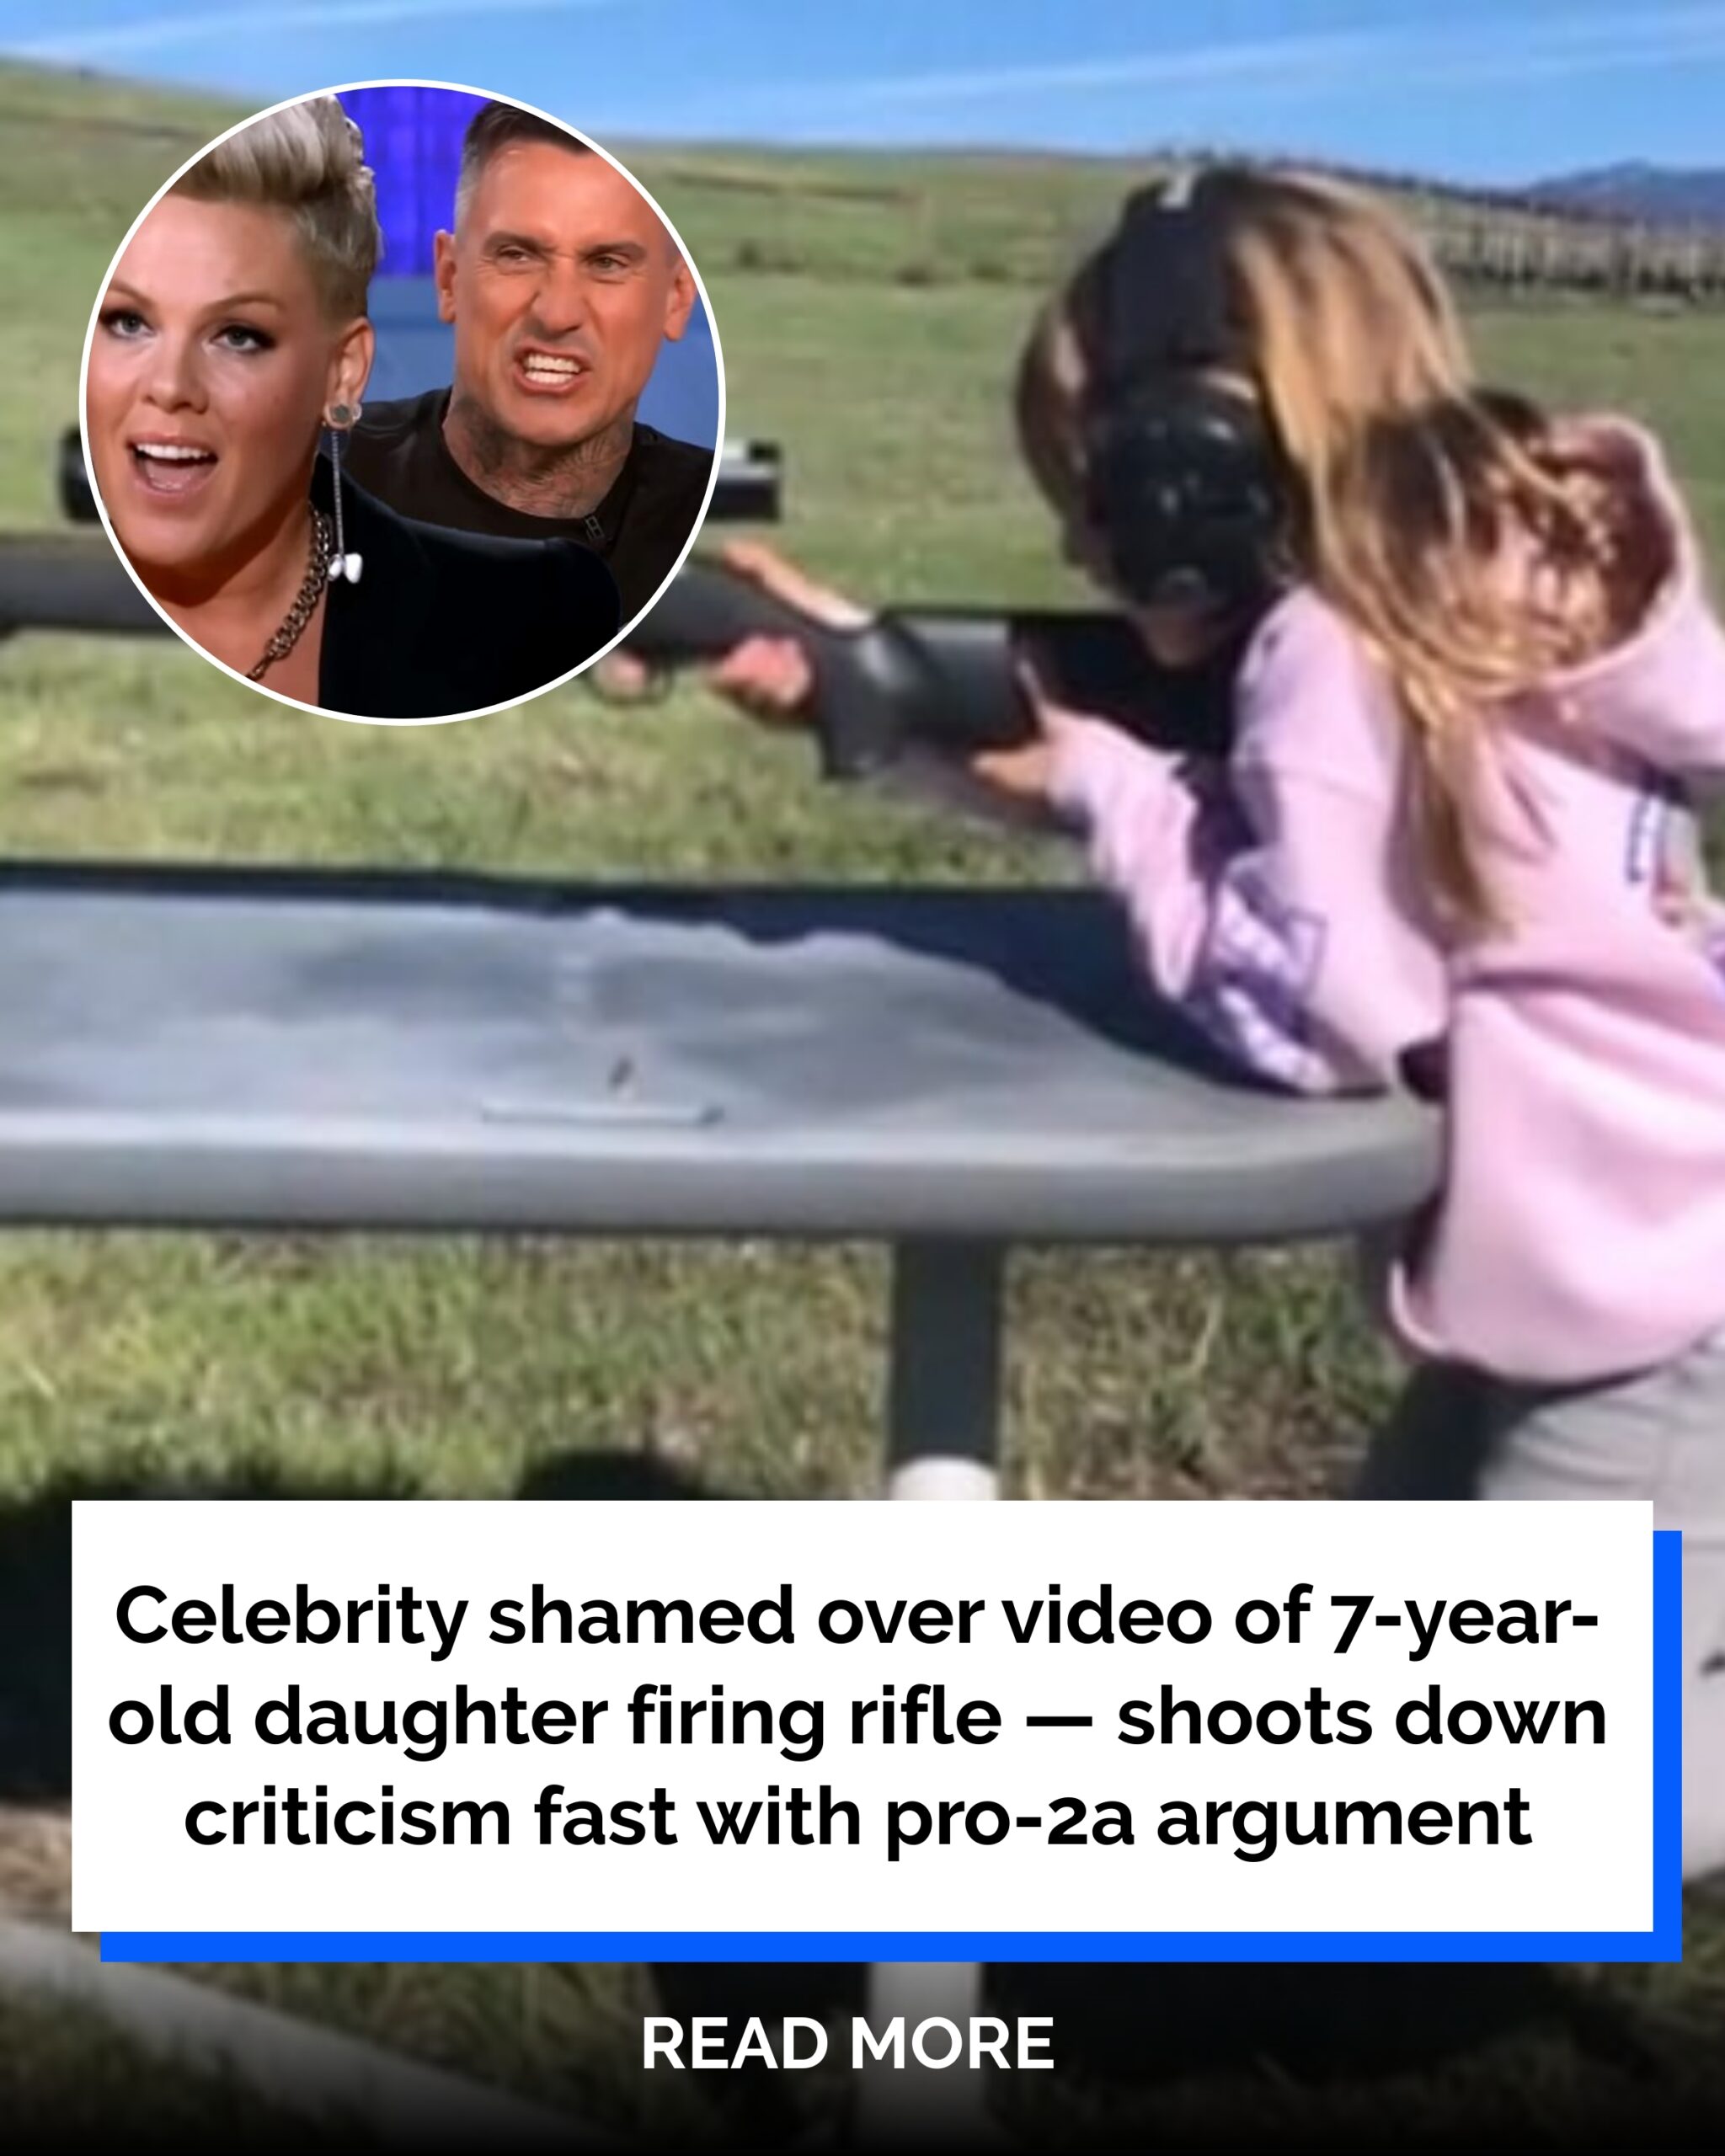 Celebrity Shamed Over Video Of 7-Year-Old Daughter Firing Rifle — He Shoots Down Criticism Fast With Pro-2A Argument